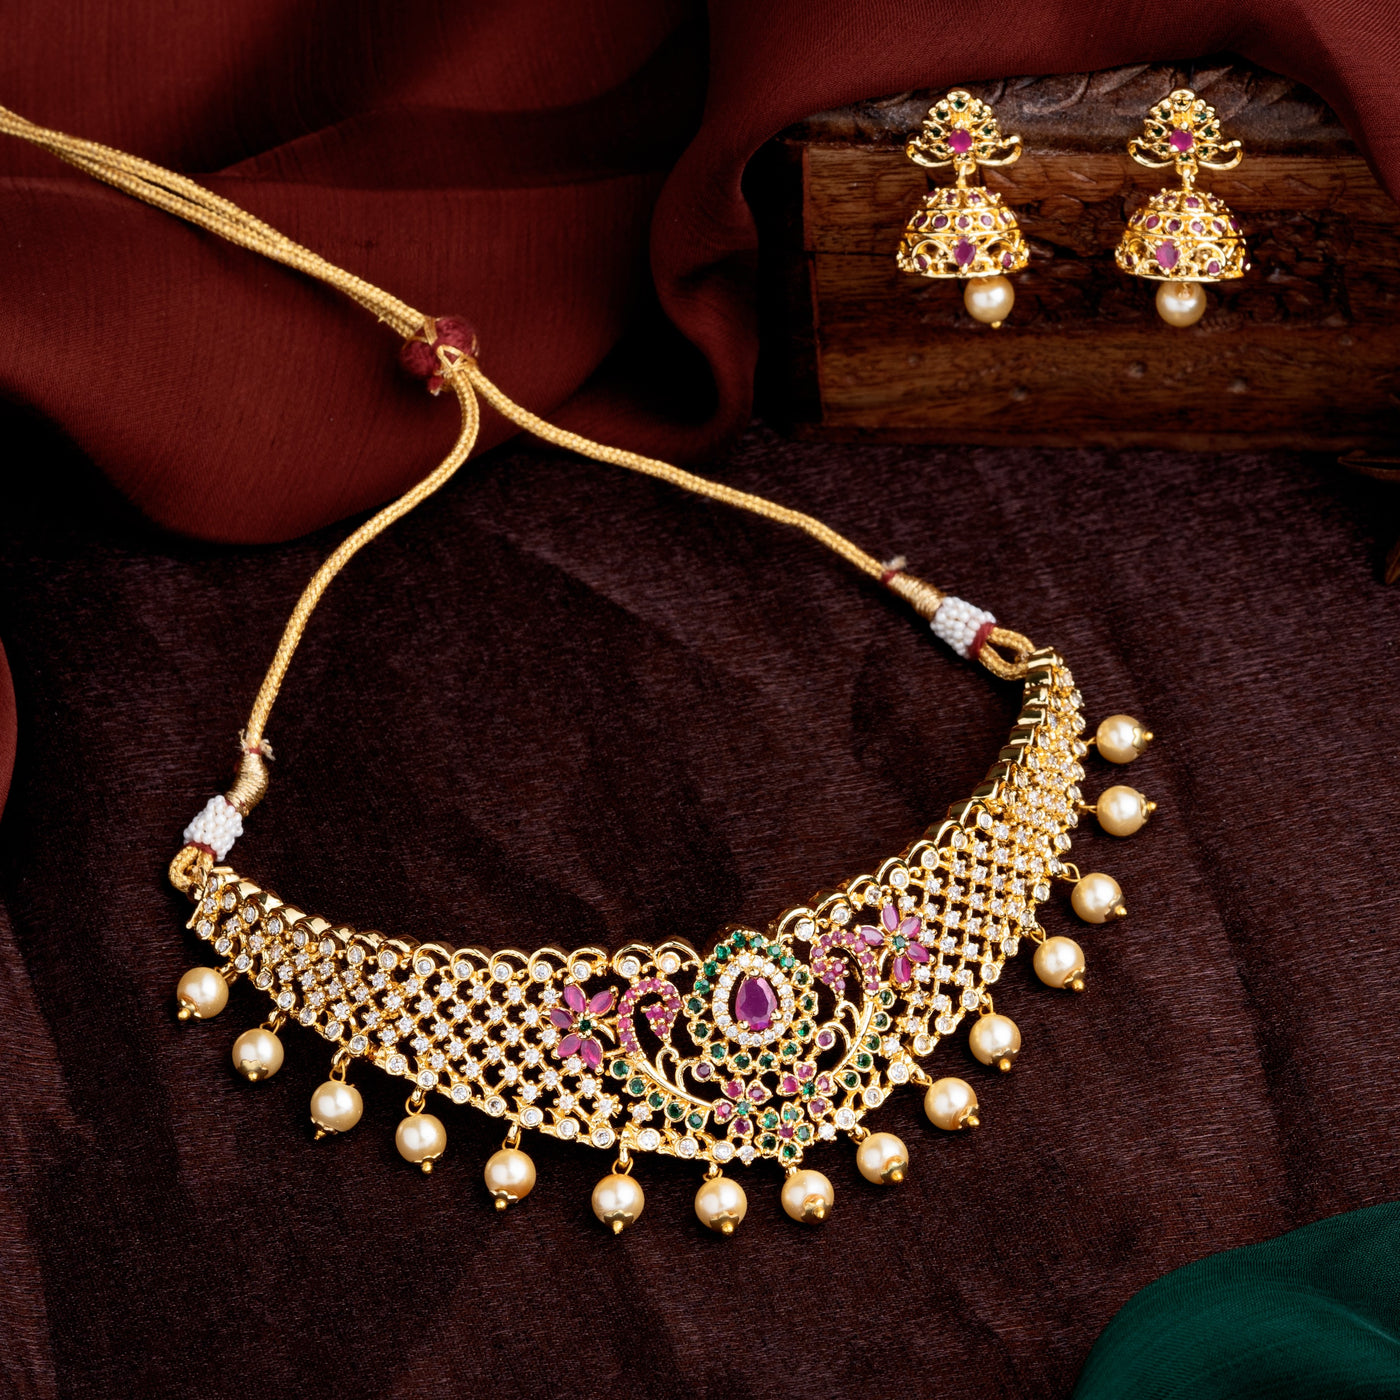 Estele Gold Plated CZ Ravishing Bridal Choker Necklace Set with Colored Stones & Pearls for Women